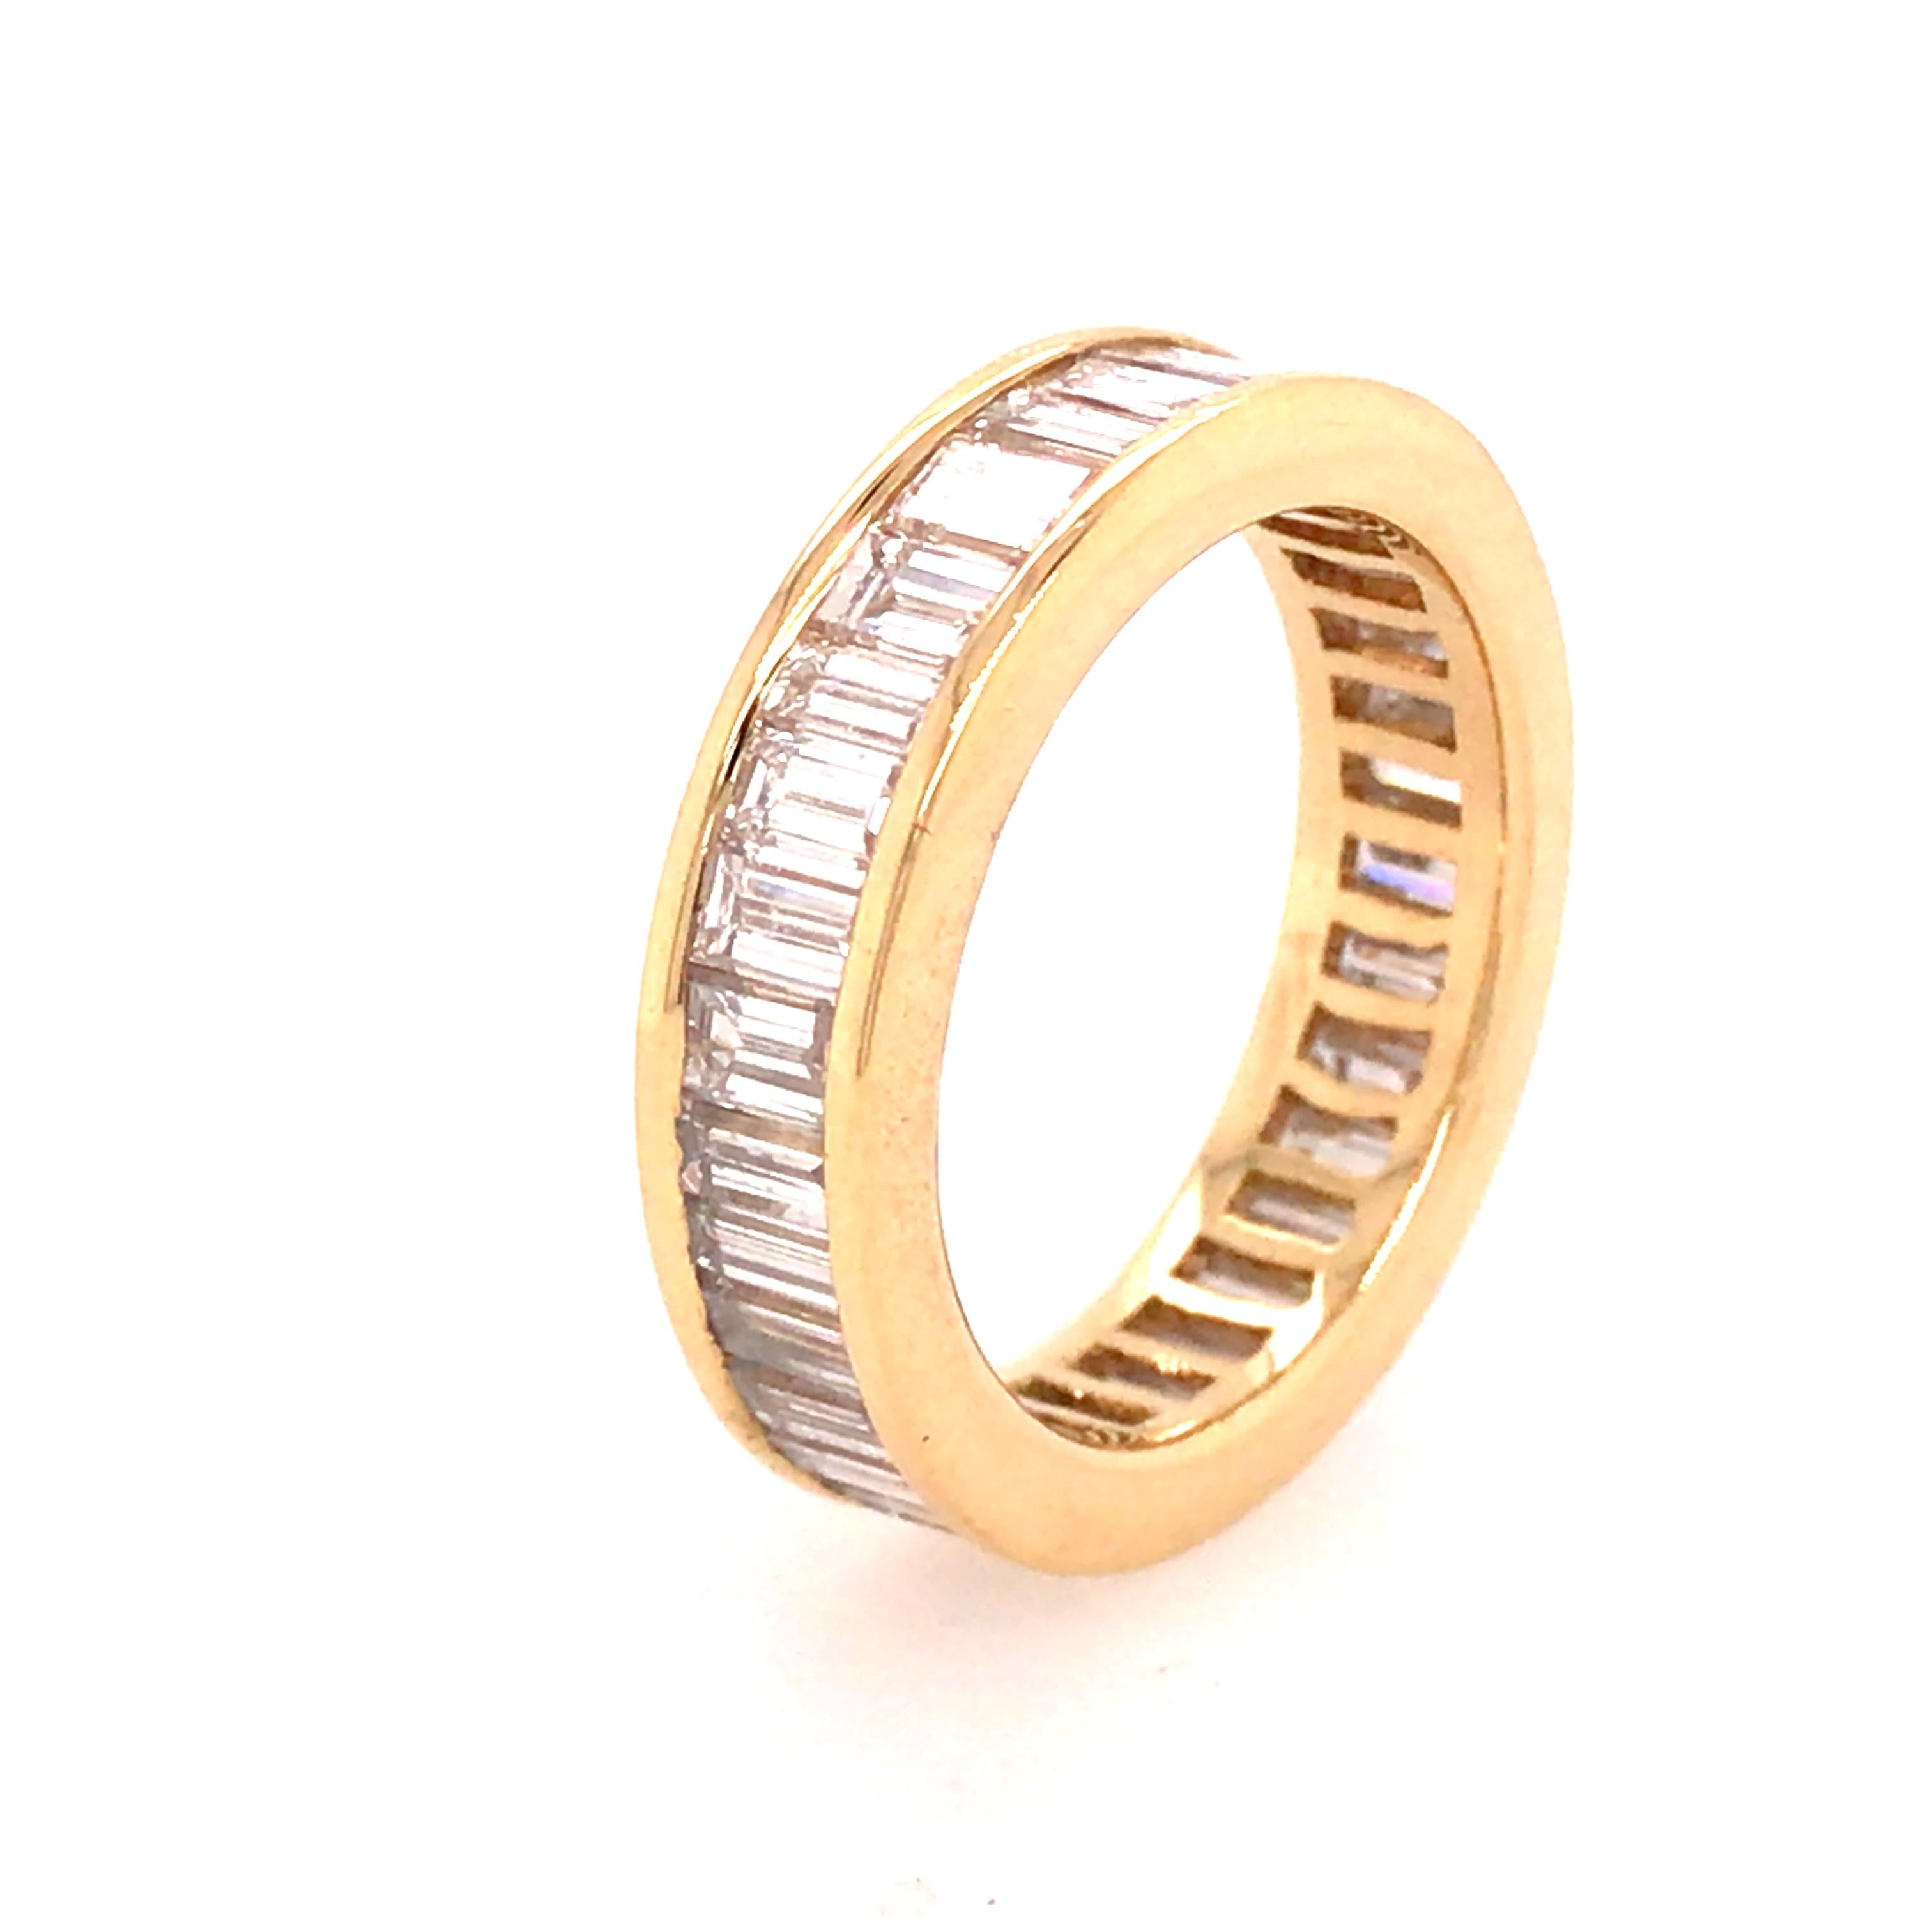 Baguette Diamond Eternity Band in 18K Yellow Gold.  Baguette Diamonds weighing 4.08 carat total weight, F-G in color and VS in clarity are expertly set.  The Ring measures 1/4 inch in width.  Ring size 7.  5.6 Grams.